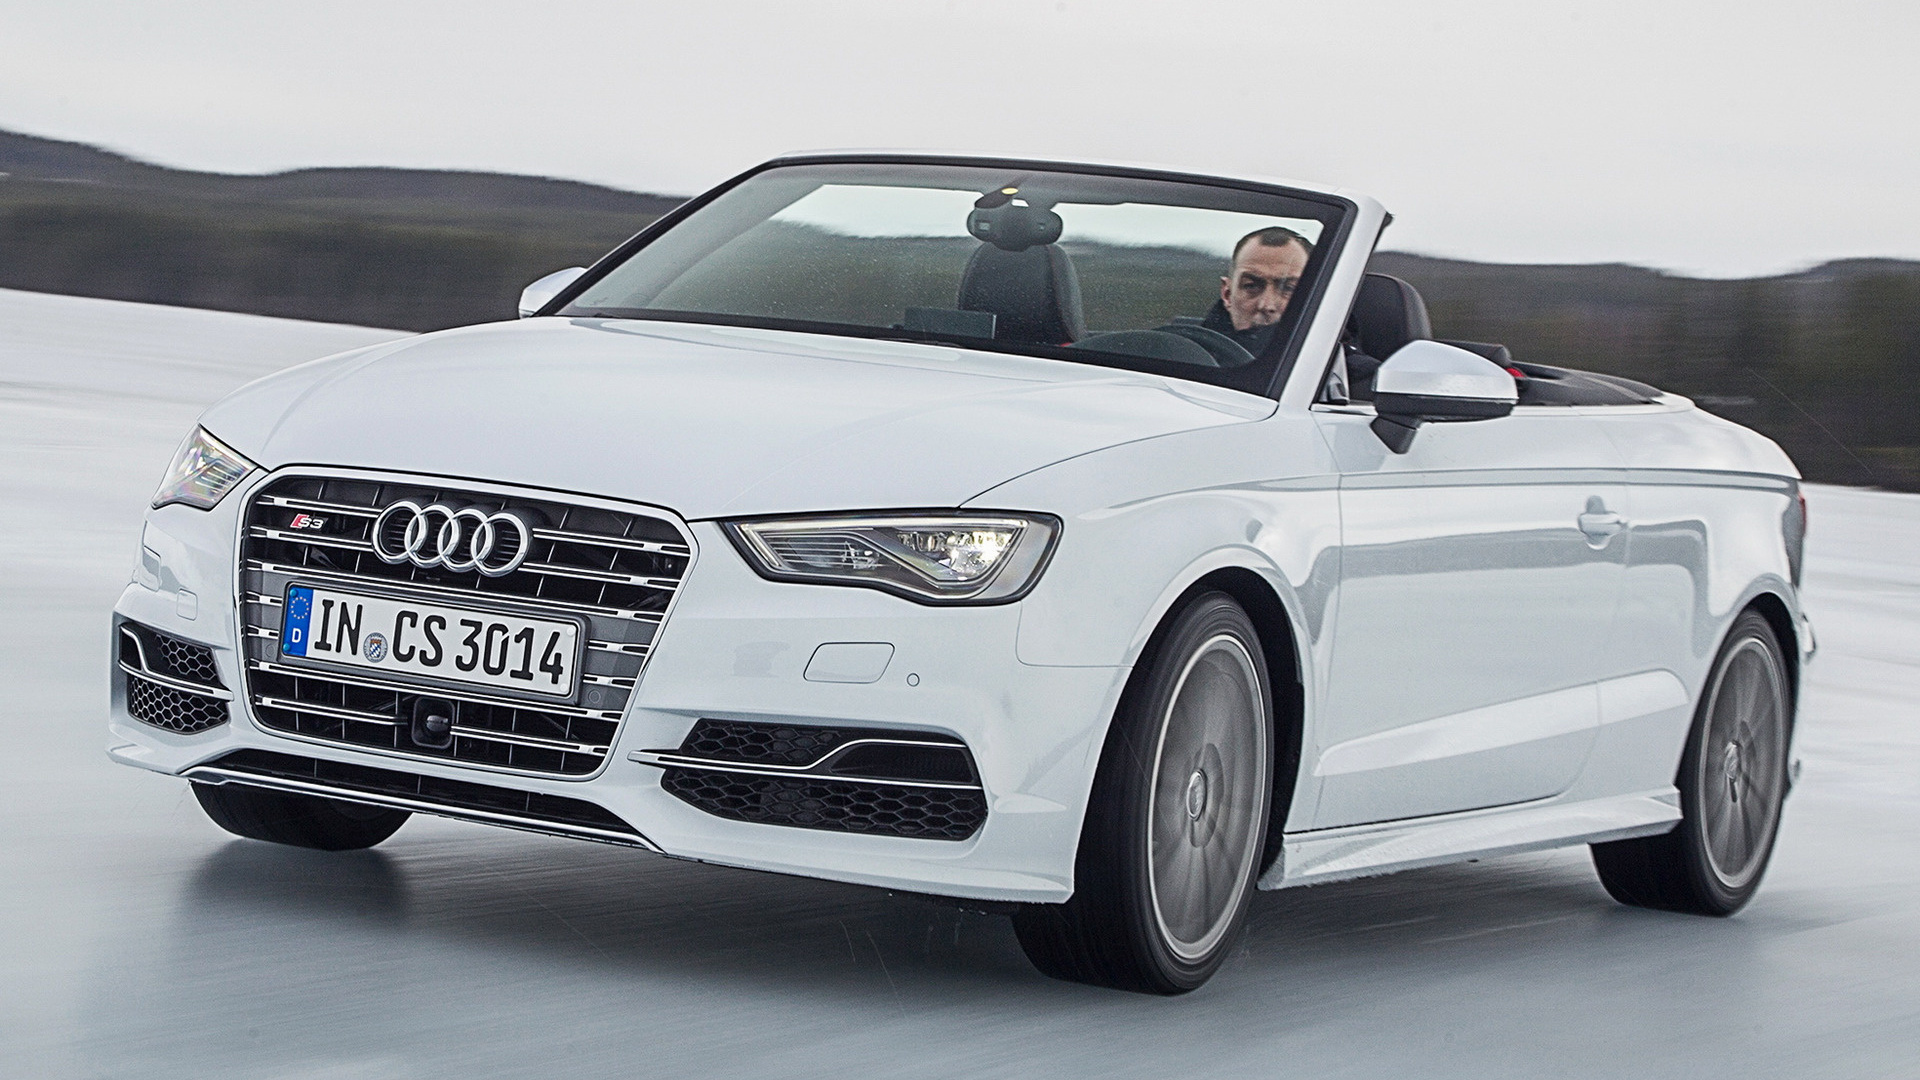 2014 Audi S3 Cabriolet Wallpapers And Hd Images Car Pixel